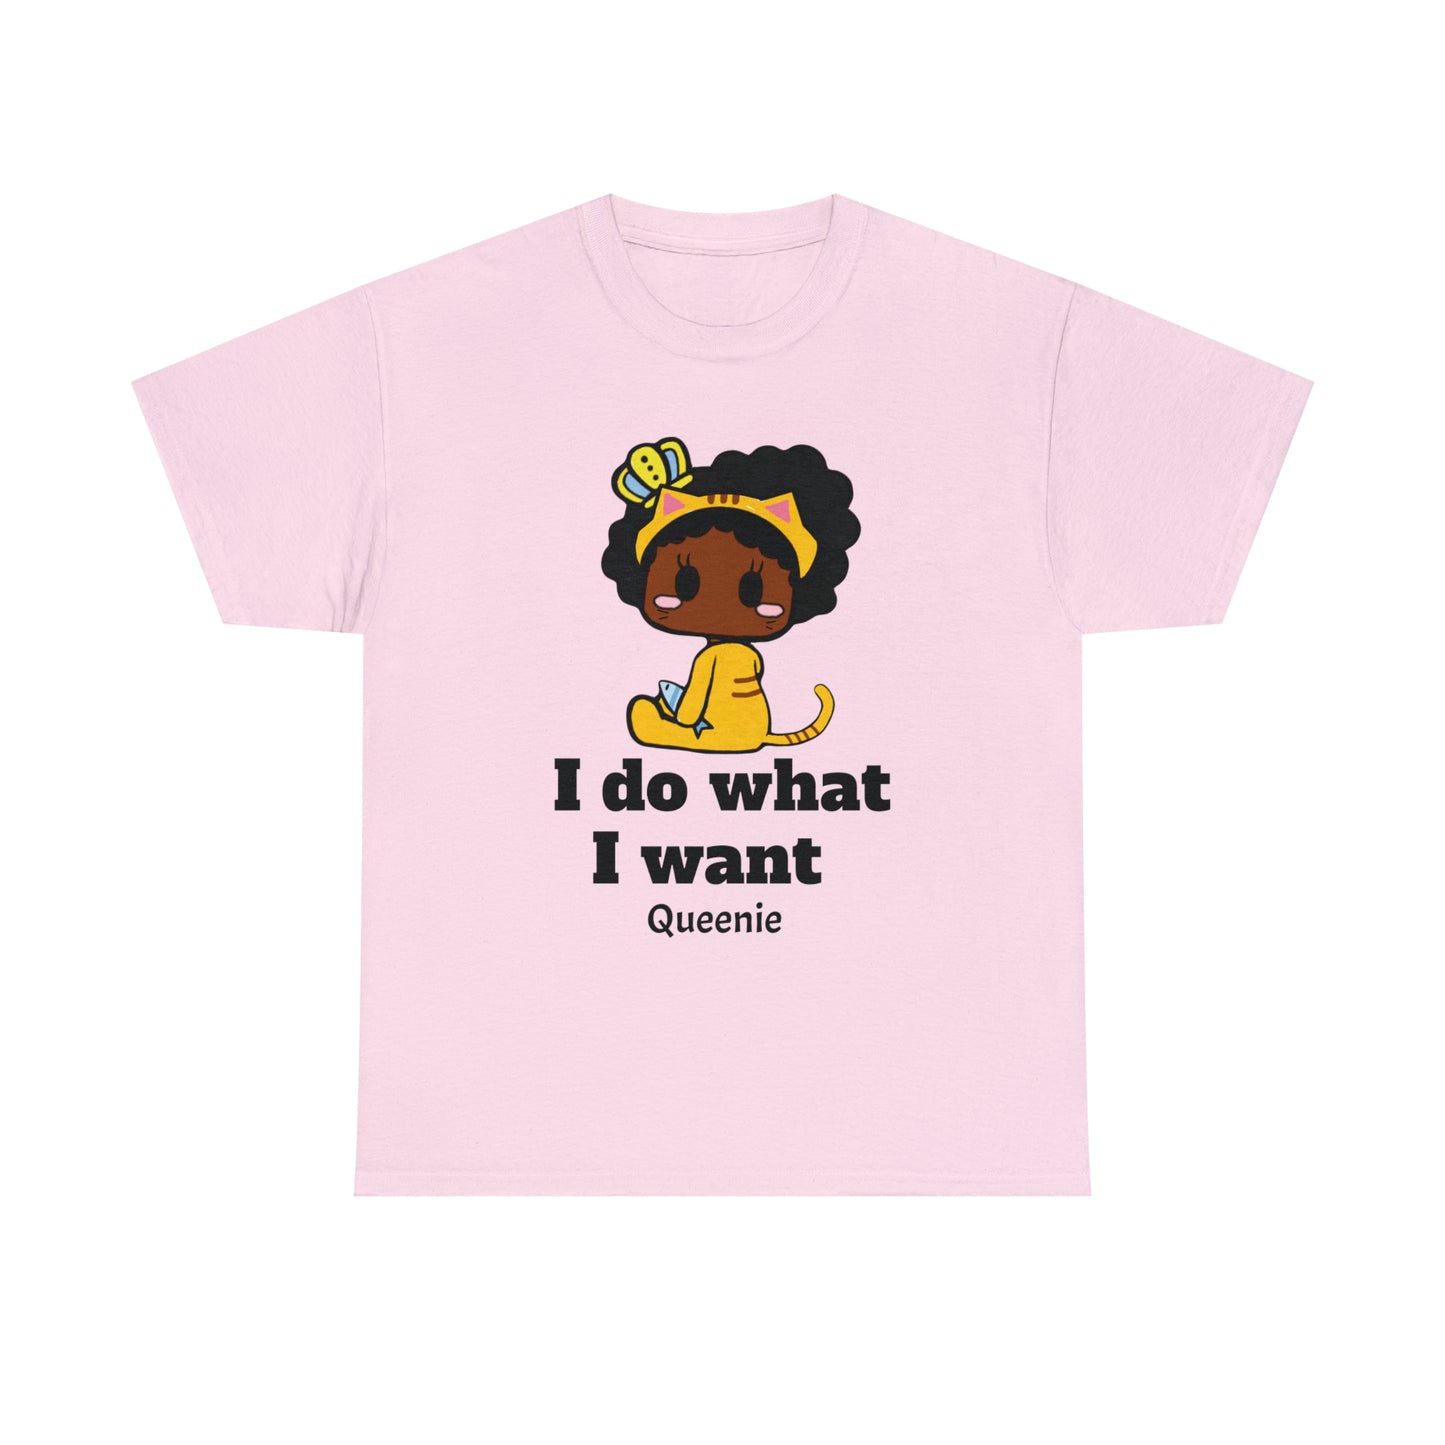 I do what I want Cat Queenie Unisex Tee